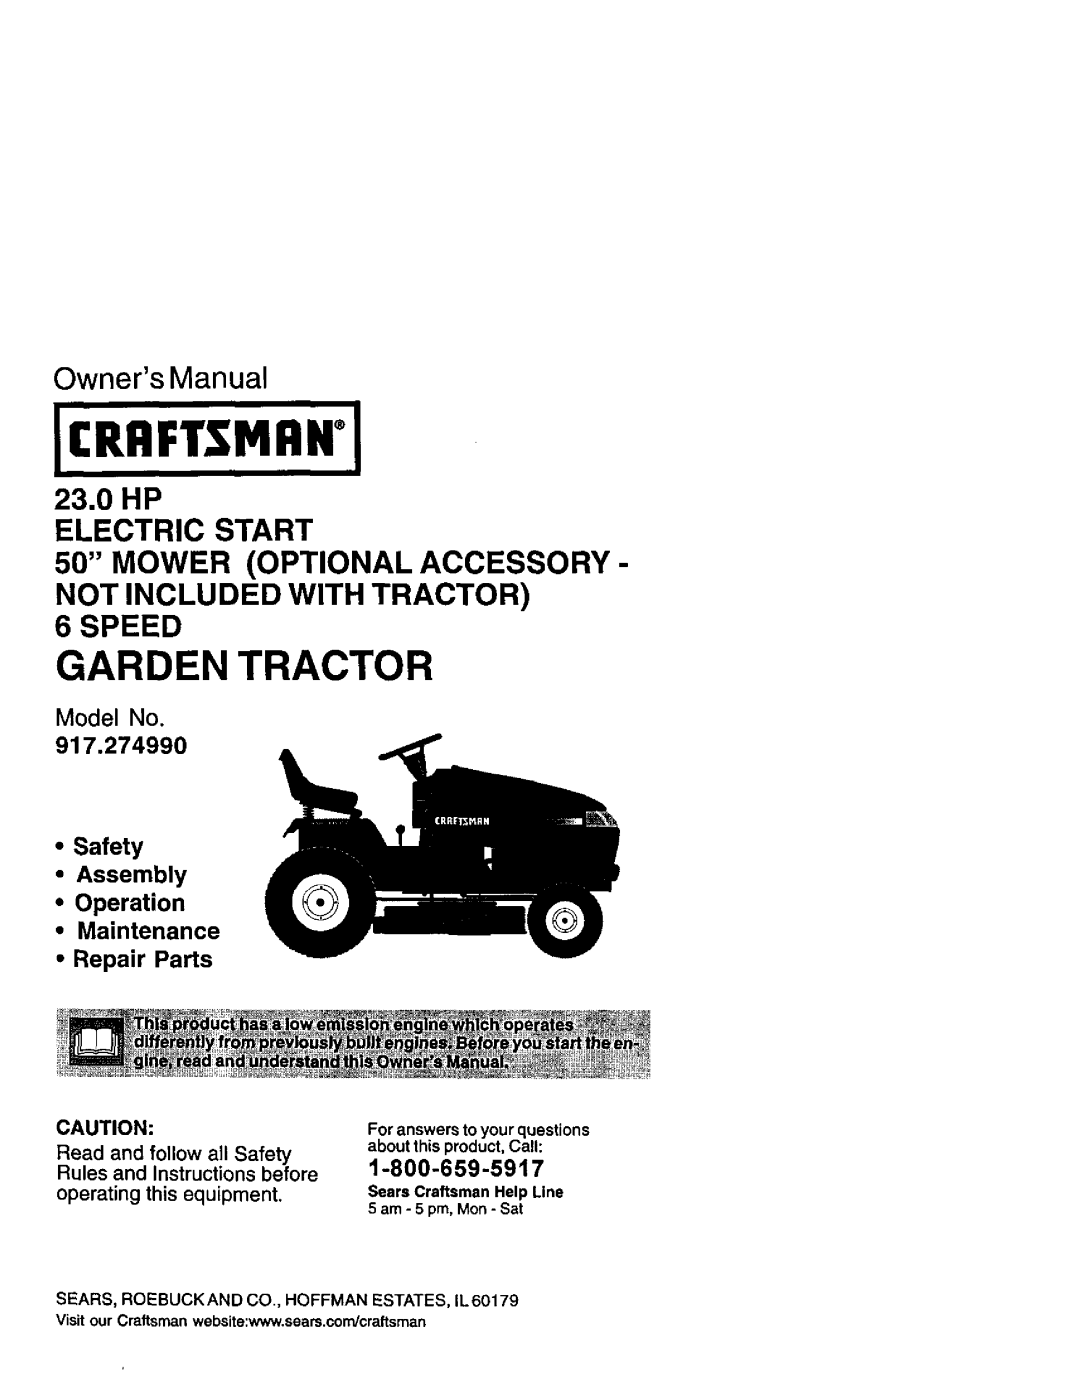 Craftsman 917.27499 manual OwnersManual, Model No, Safety Assembly Operation, Maintenance Repair Parts, Icraftsmawi 